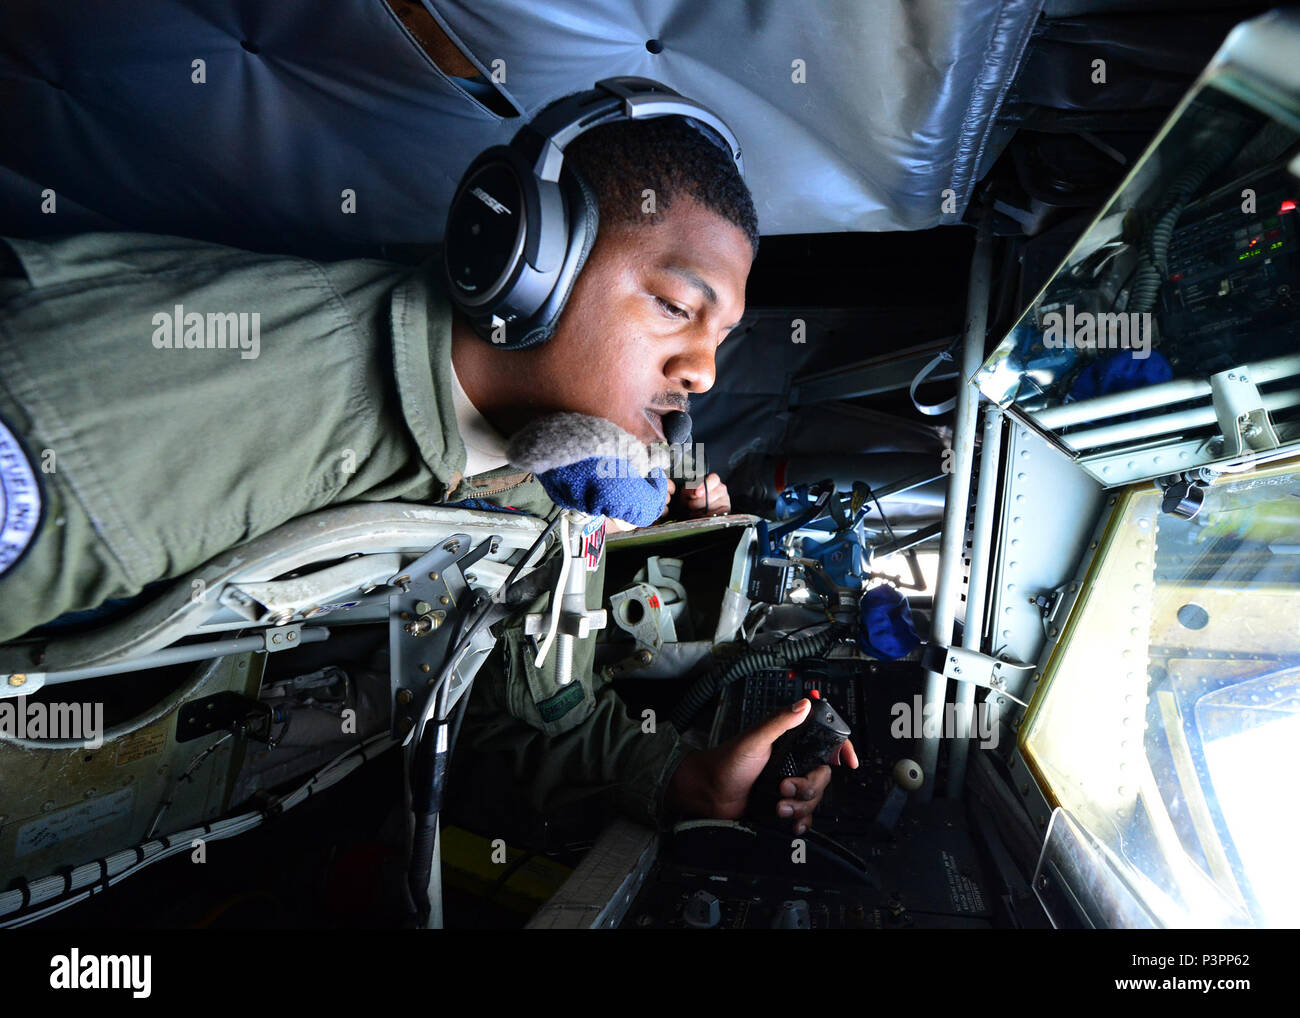 U.S. Air Force Senior Airman Cory Drummond, a 909th Aircraft Refueling Squadron boom operator, refuels a B-52H Stratofortress assigned to the 69th Bomb Squadron, Minot Air Force Base, N.D., over the Pacific Ocean during an international sinking exercise for Rim of the Pacific 2016 near Joint Base Pearl Harbor-Hickam, July 14, 2016. Twenty-six nations, more than 40 ships and submarines, more than 200 aircraft, and 25,000 personnel are participating in RIMPAC from June 30 to Aug. 4 in and around the Hawaiian Islands and Southern California. The world's largest international maritime exercise, RI Stock Photo